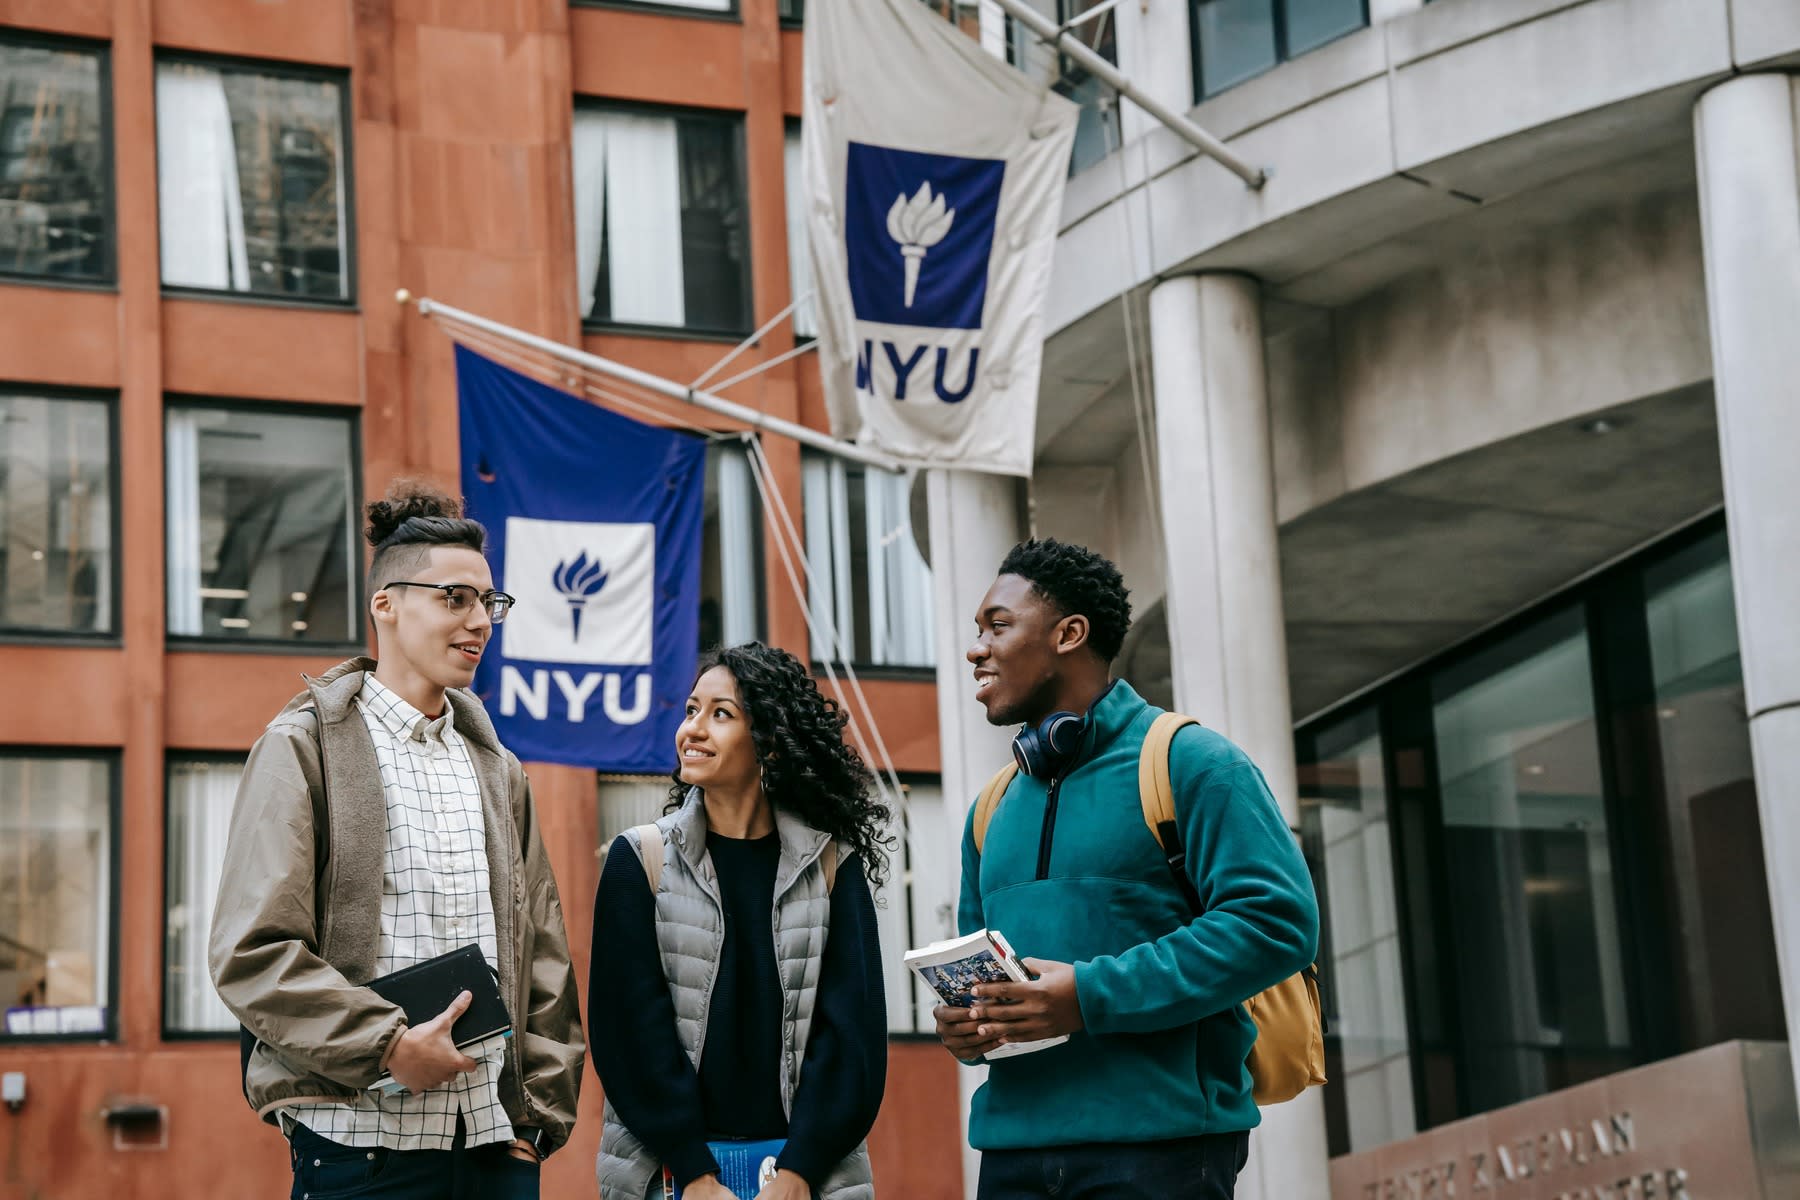 Three students standing outside the NYU building